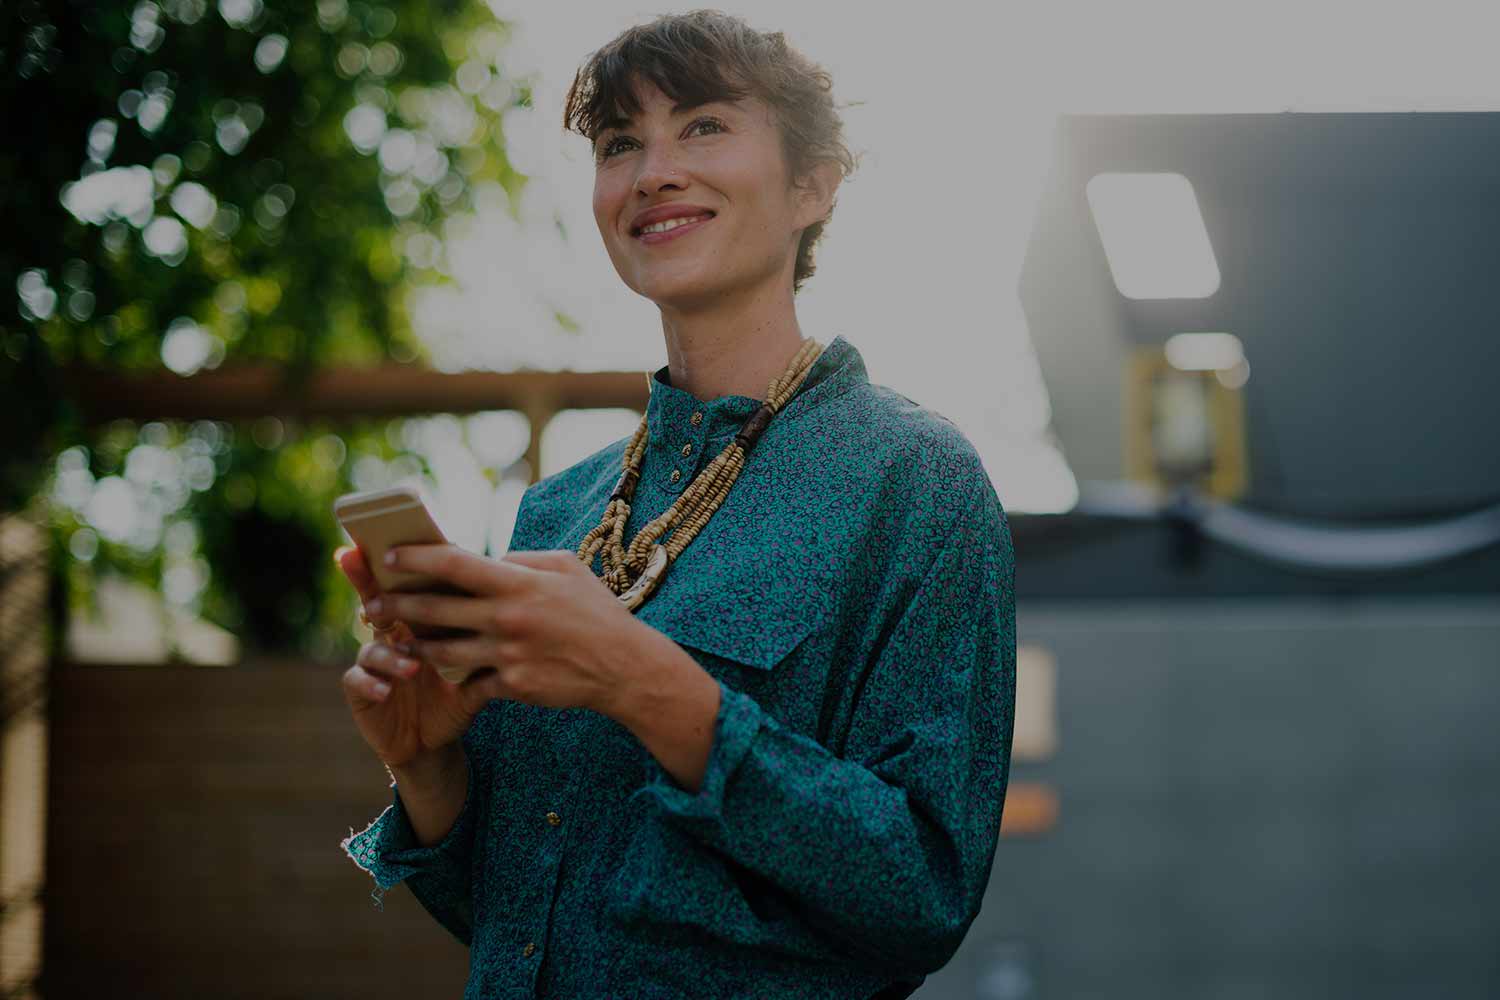 woman-smiling-with-phone-in-hand.jpg